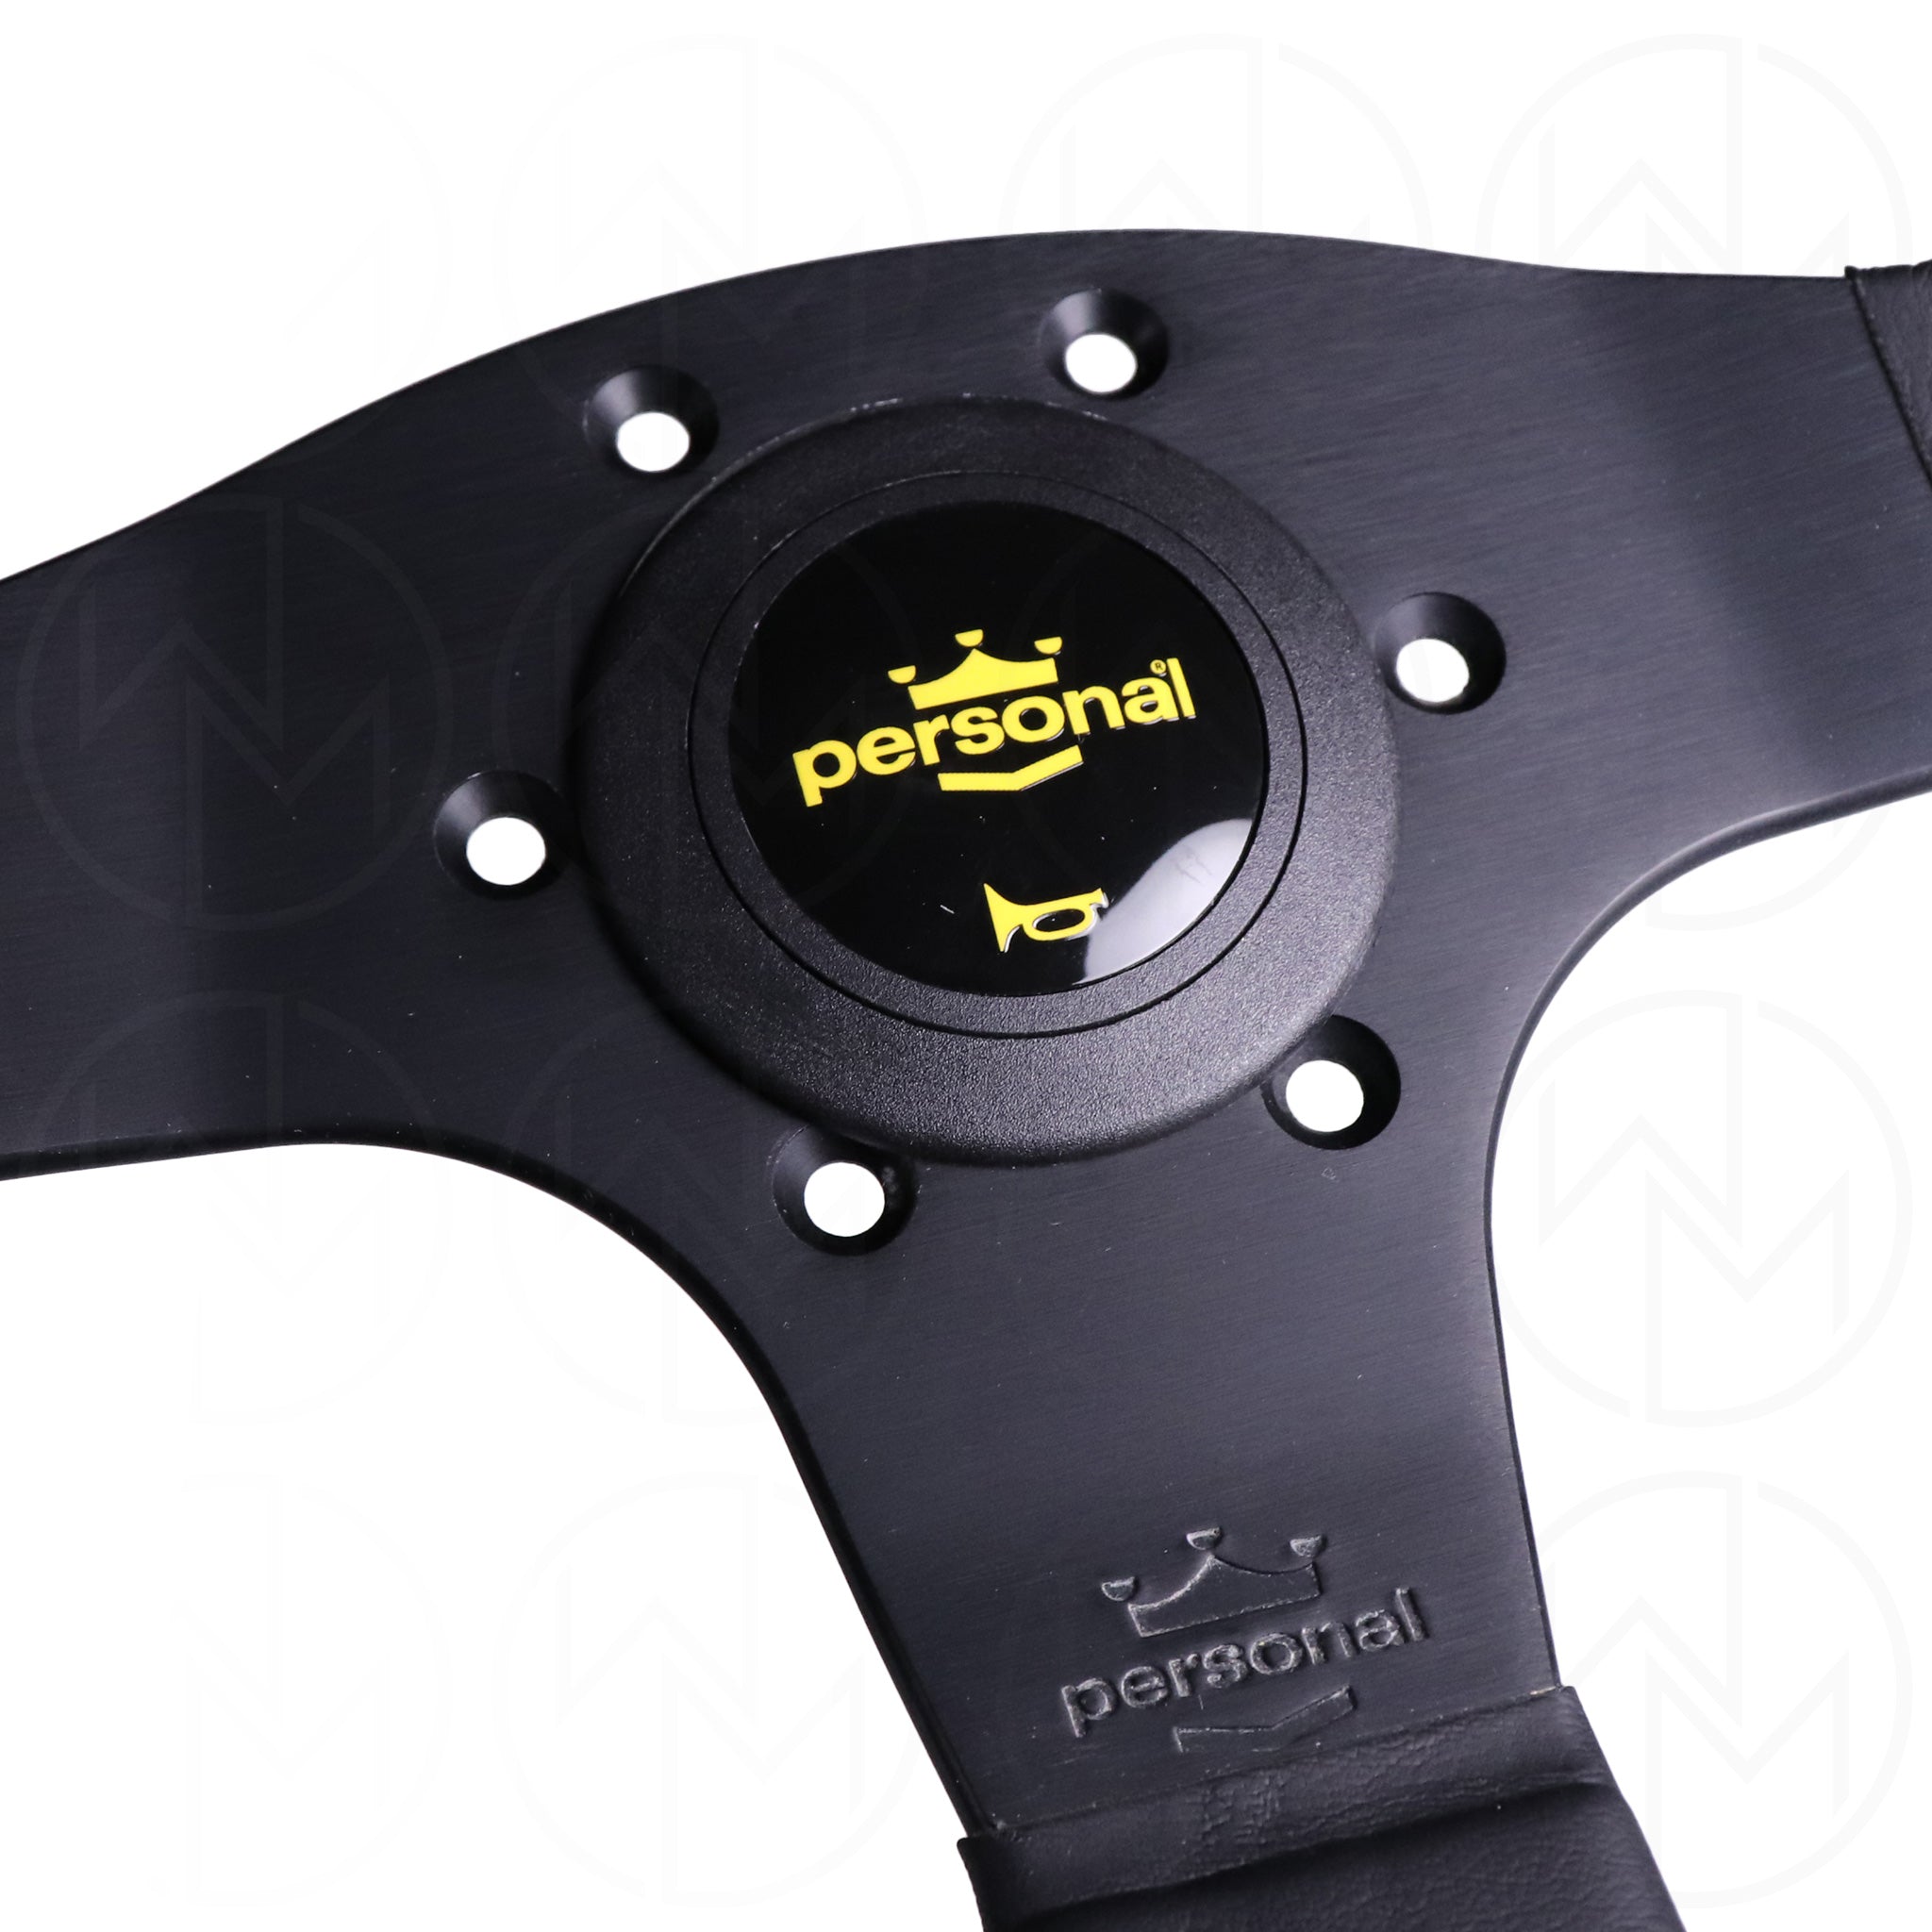 Personal Neo Actis Steering Wheel - 330mm Leather w/Yellow Stitch